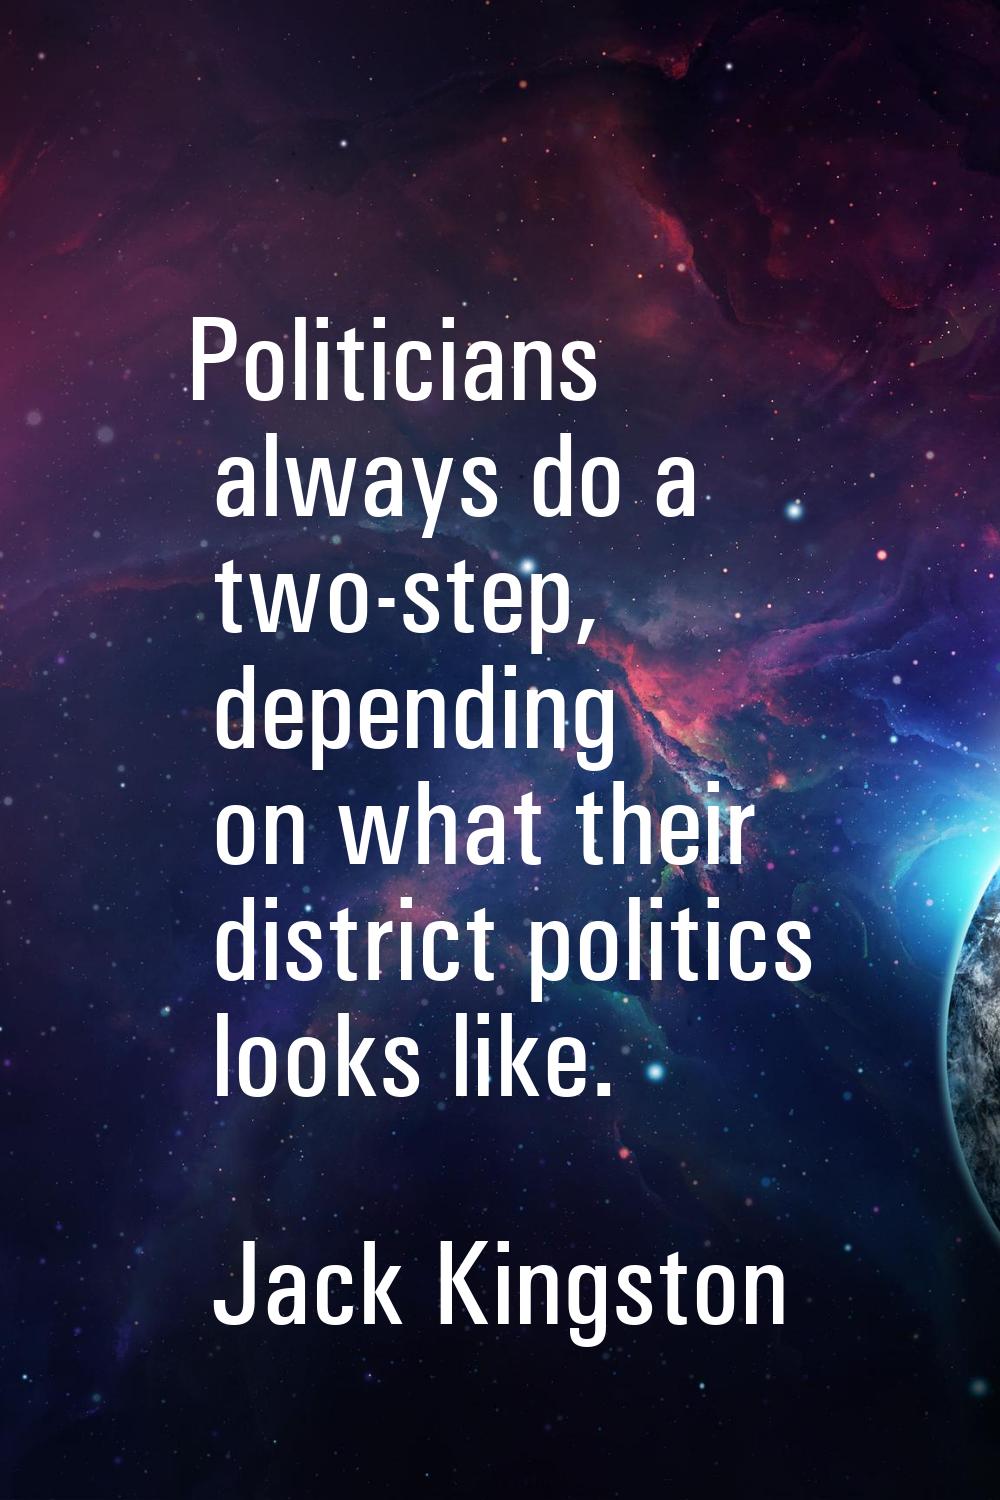 Politicians always do a two-step, depending on what their district politics looks like.